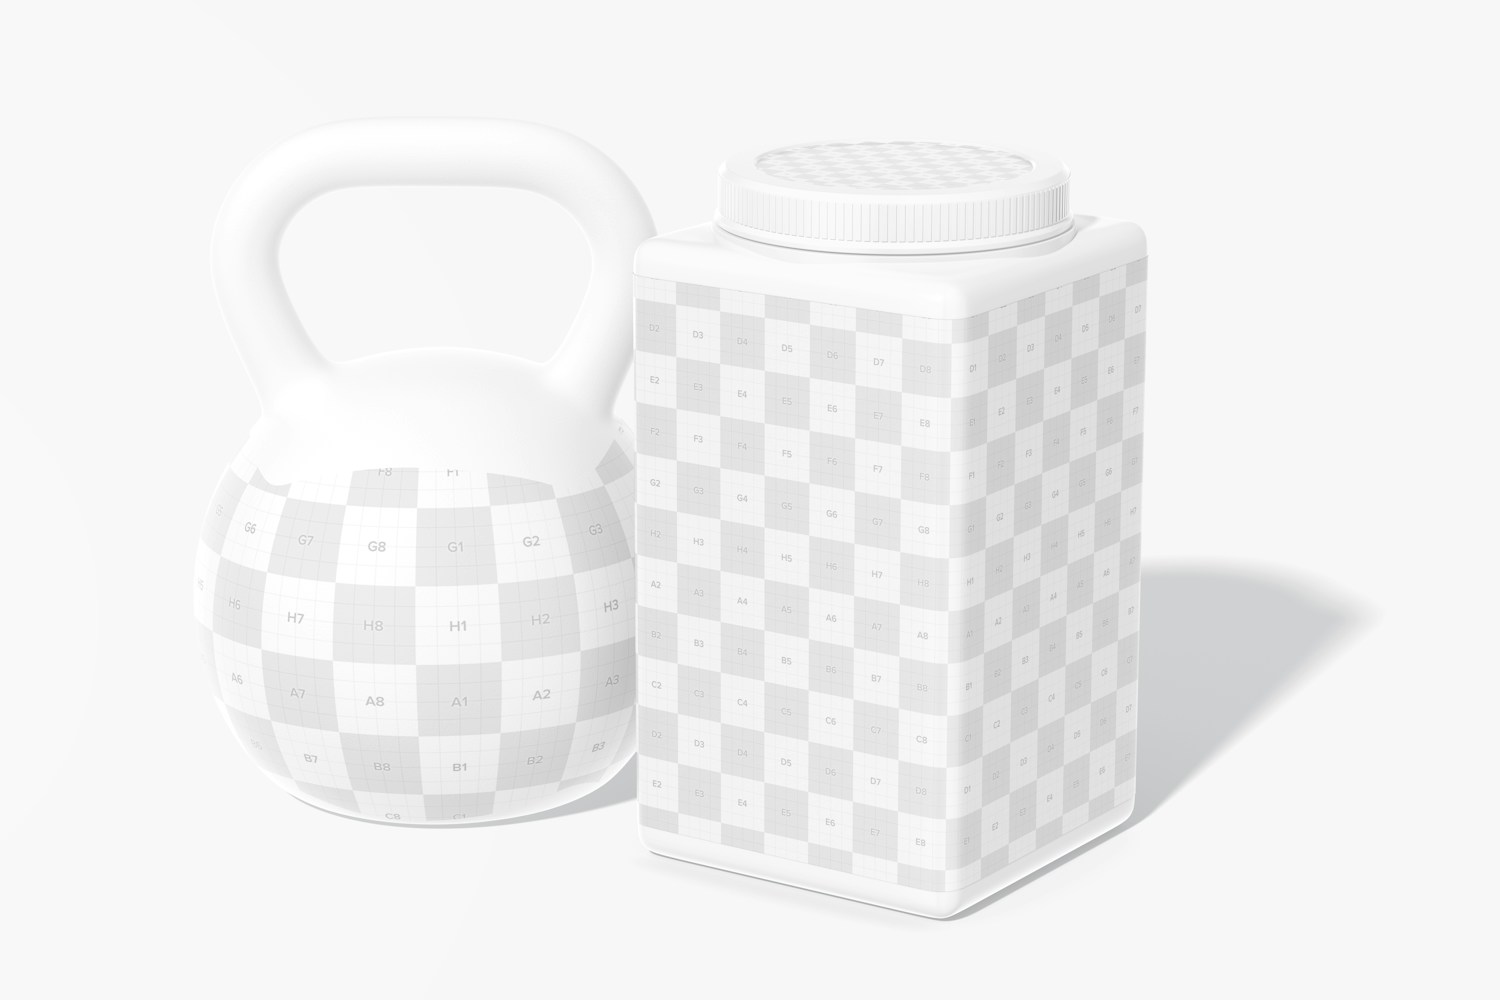 Square Protein Powder Container Mockup, Perspective